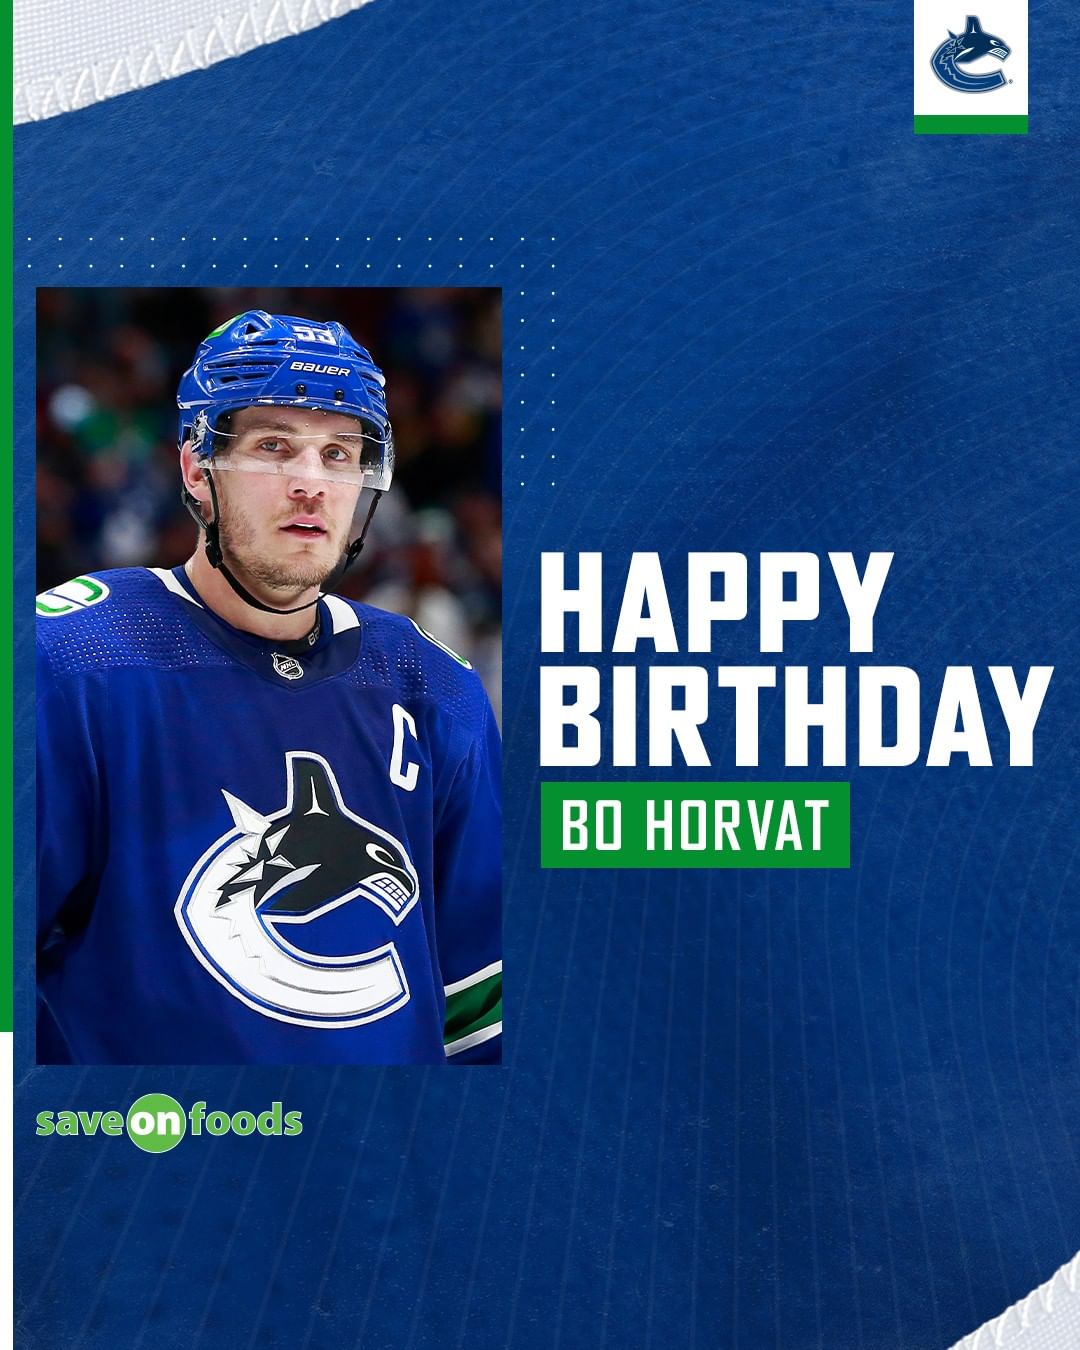 It’s time to celebrate! 
Help us wish our Captain a very happy birthday ...